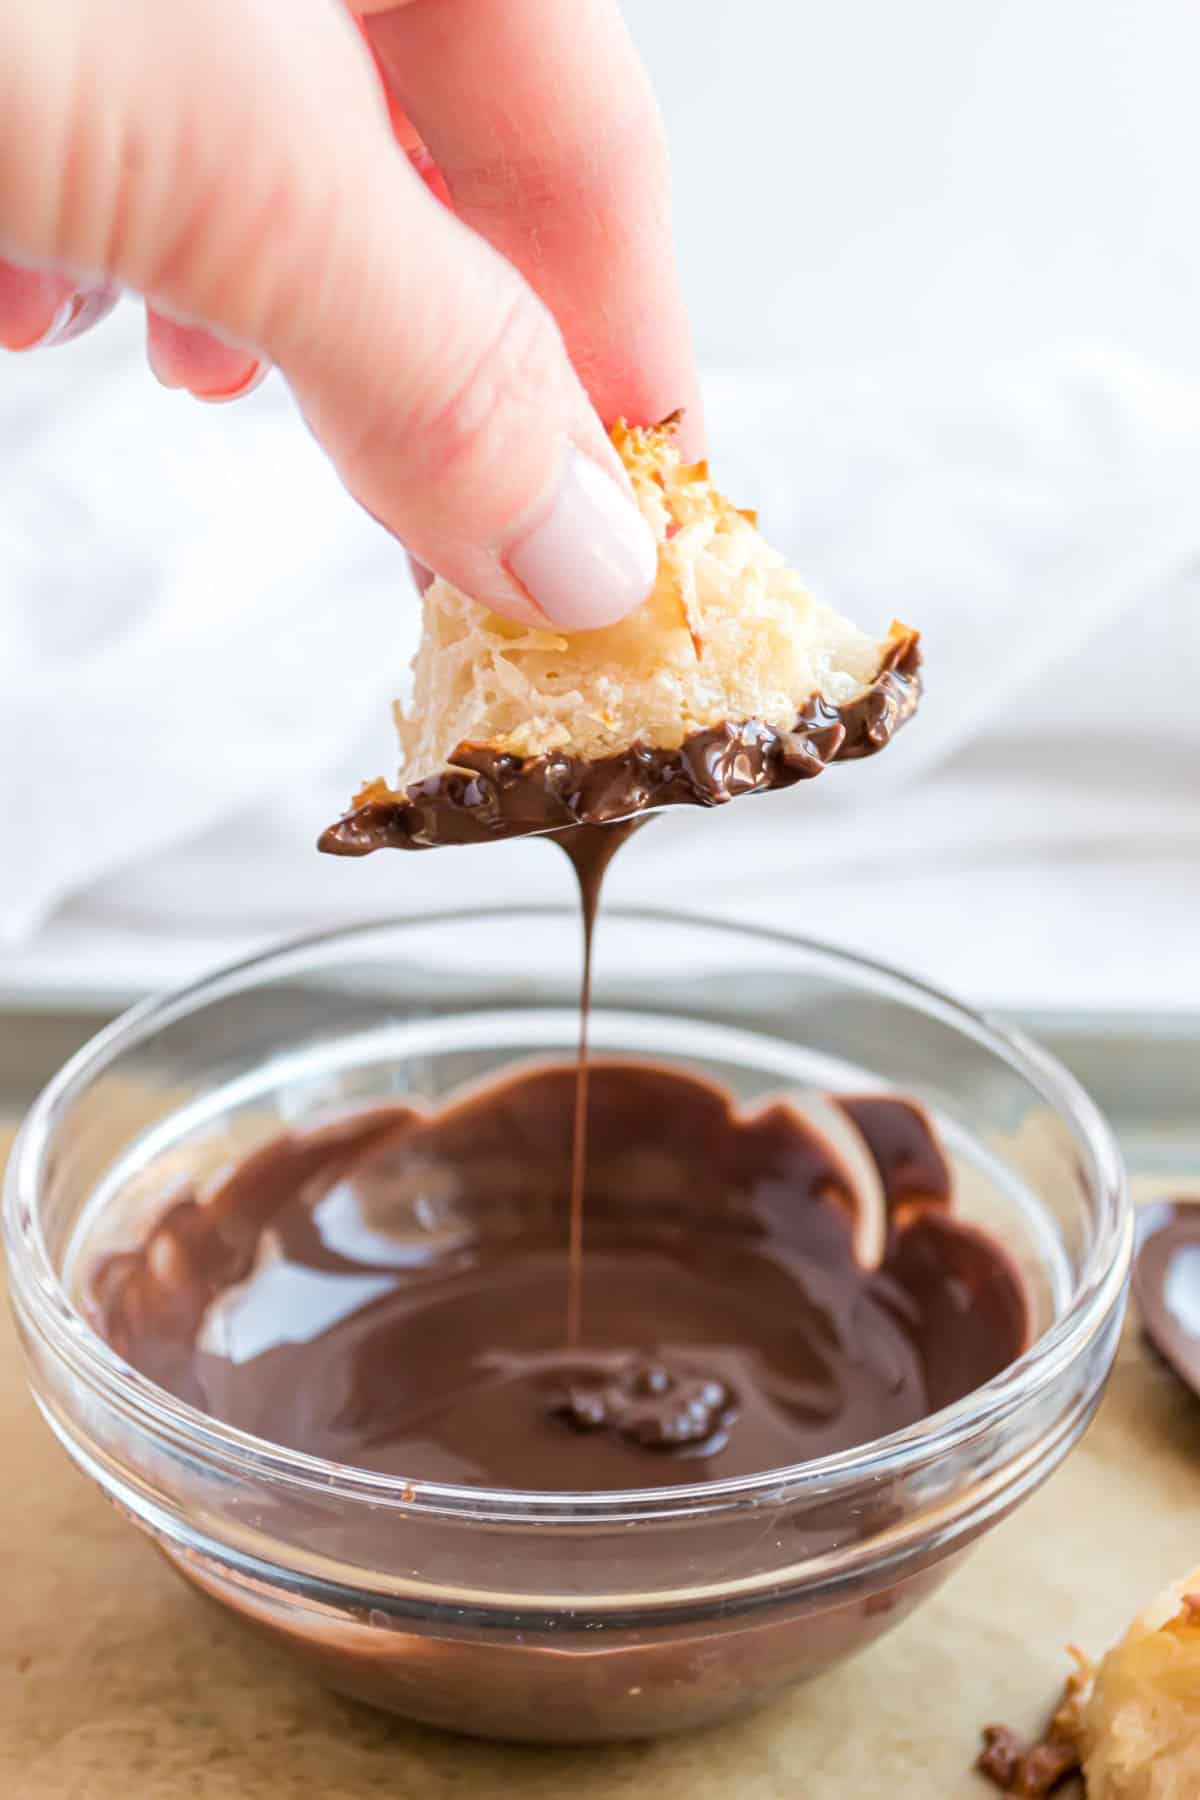 Coconut macaroon being dipped in a bowl of melted chocolate.